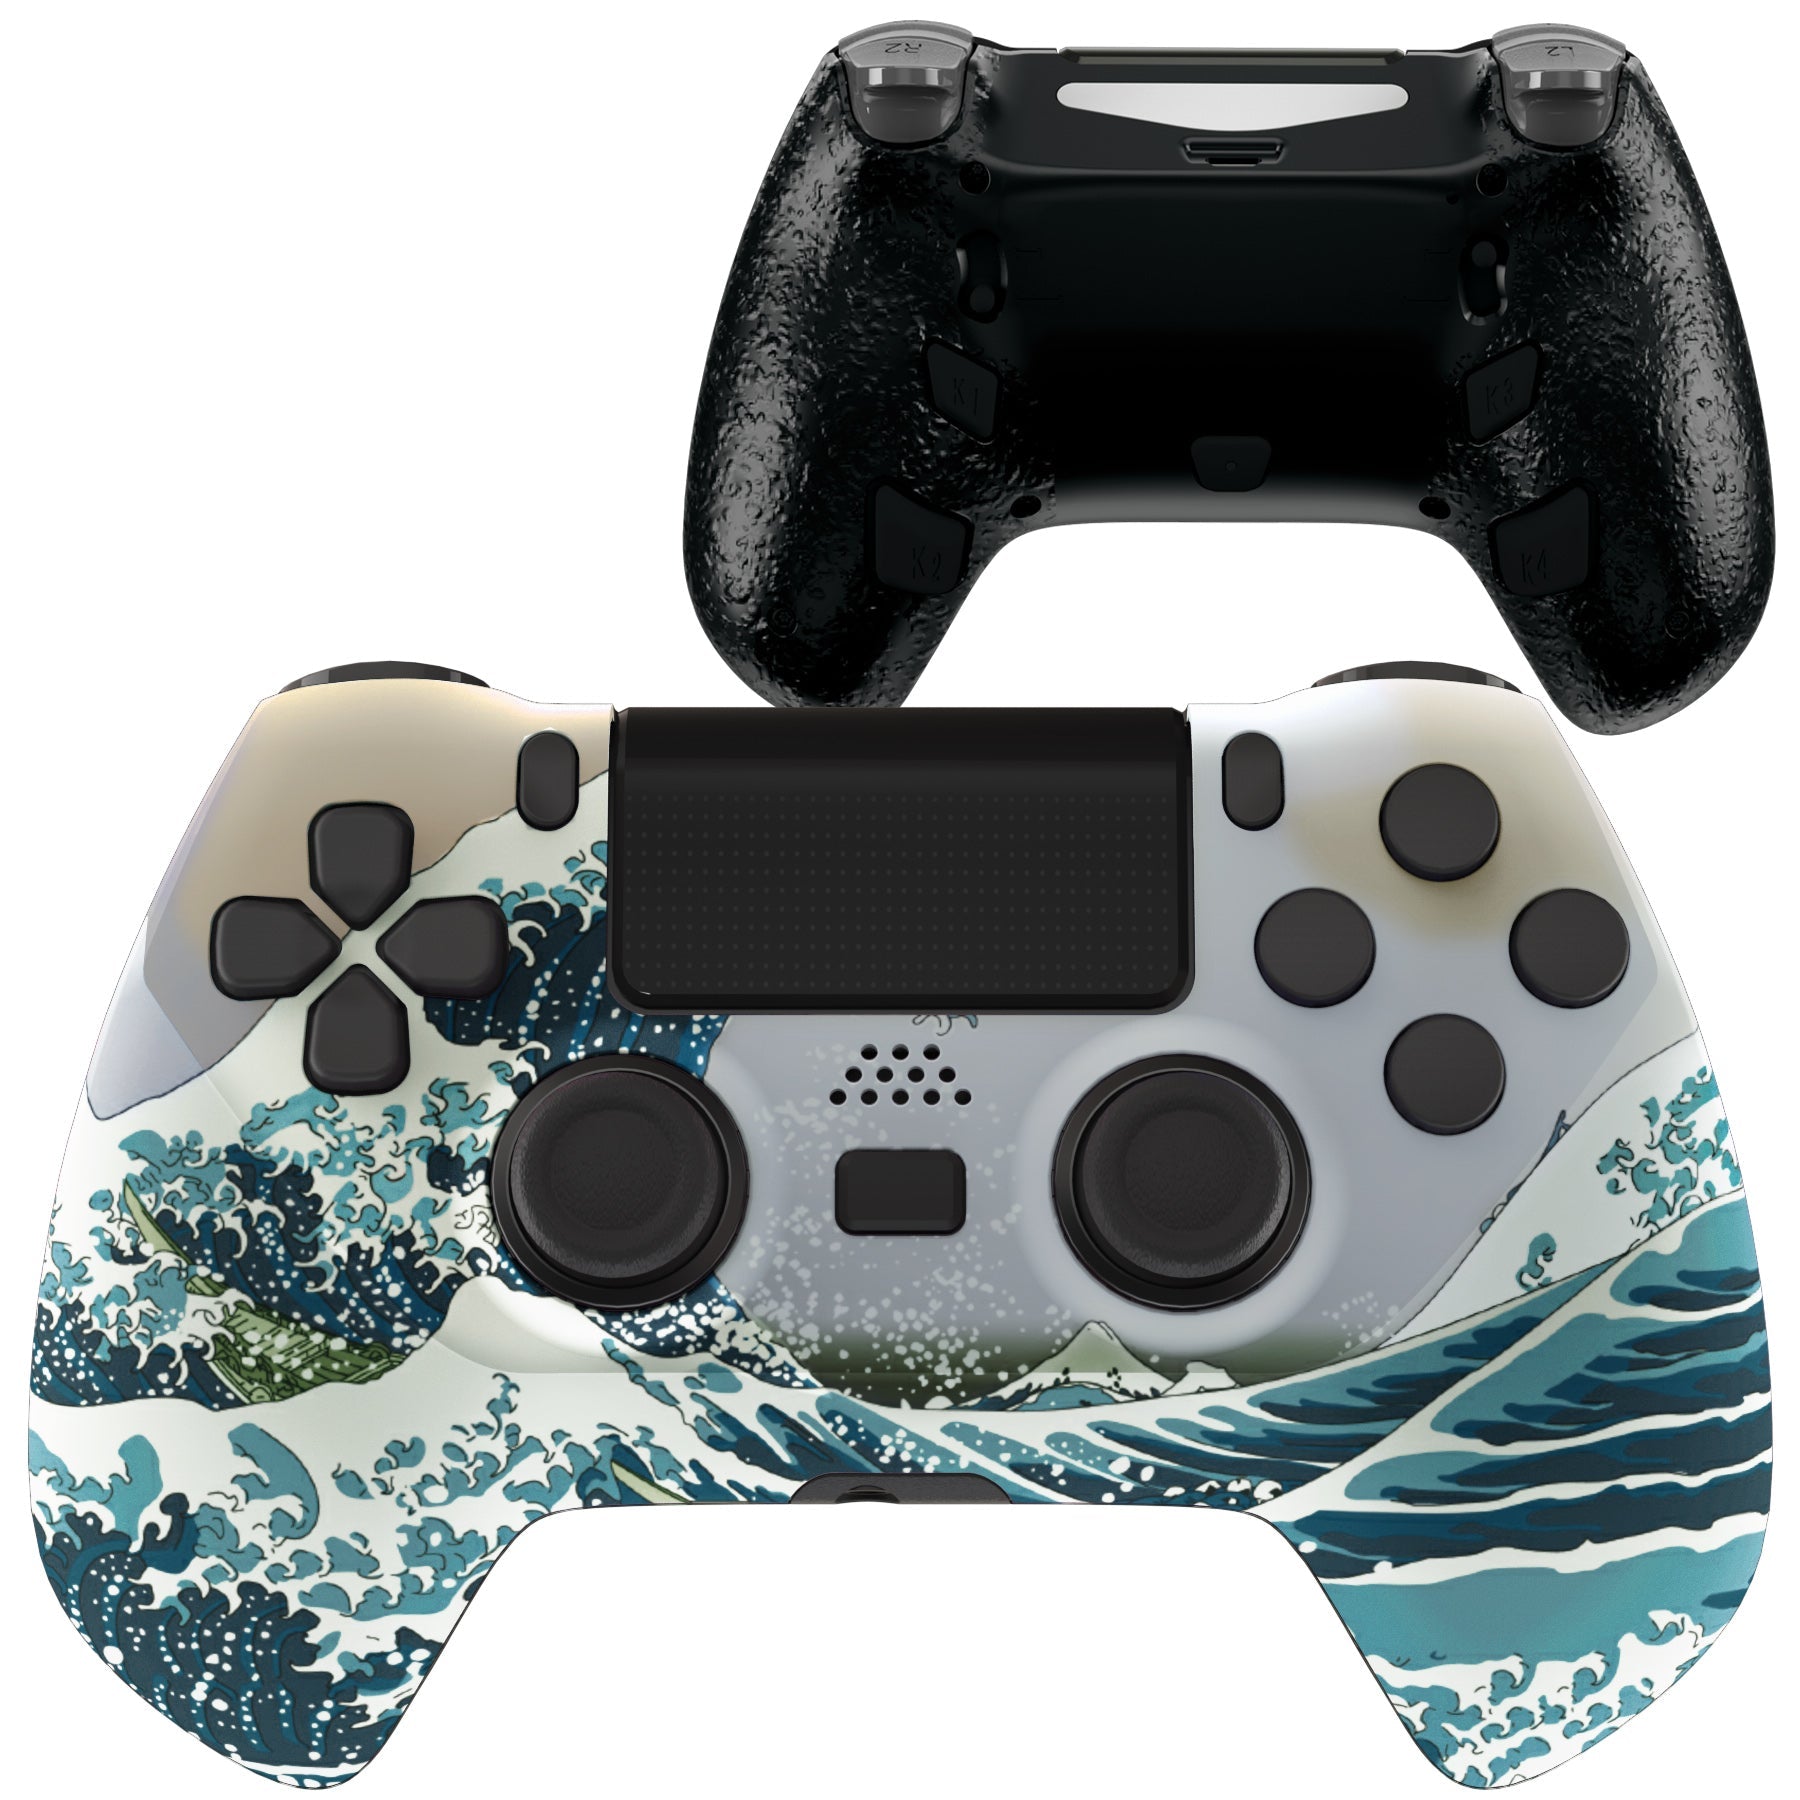 eXtremeRate Retail The Great Wave DECADE Tournament Controller (DTC) Upgrade Kit for ps4 Controller JDM-040/050/055, Upgrade Board & Ergonomic Shell & Back Buttons & Trigger Stops - Controller NOT Included - P4MG007